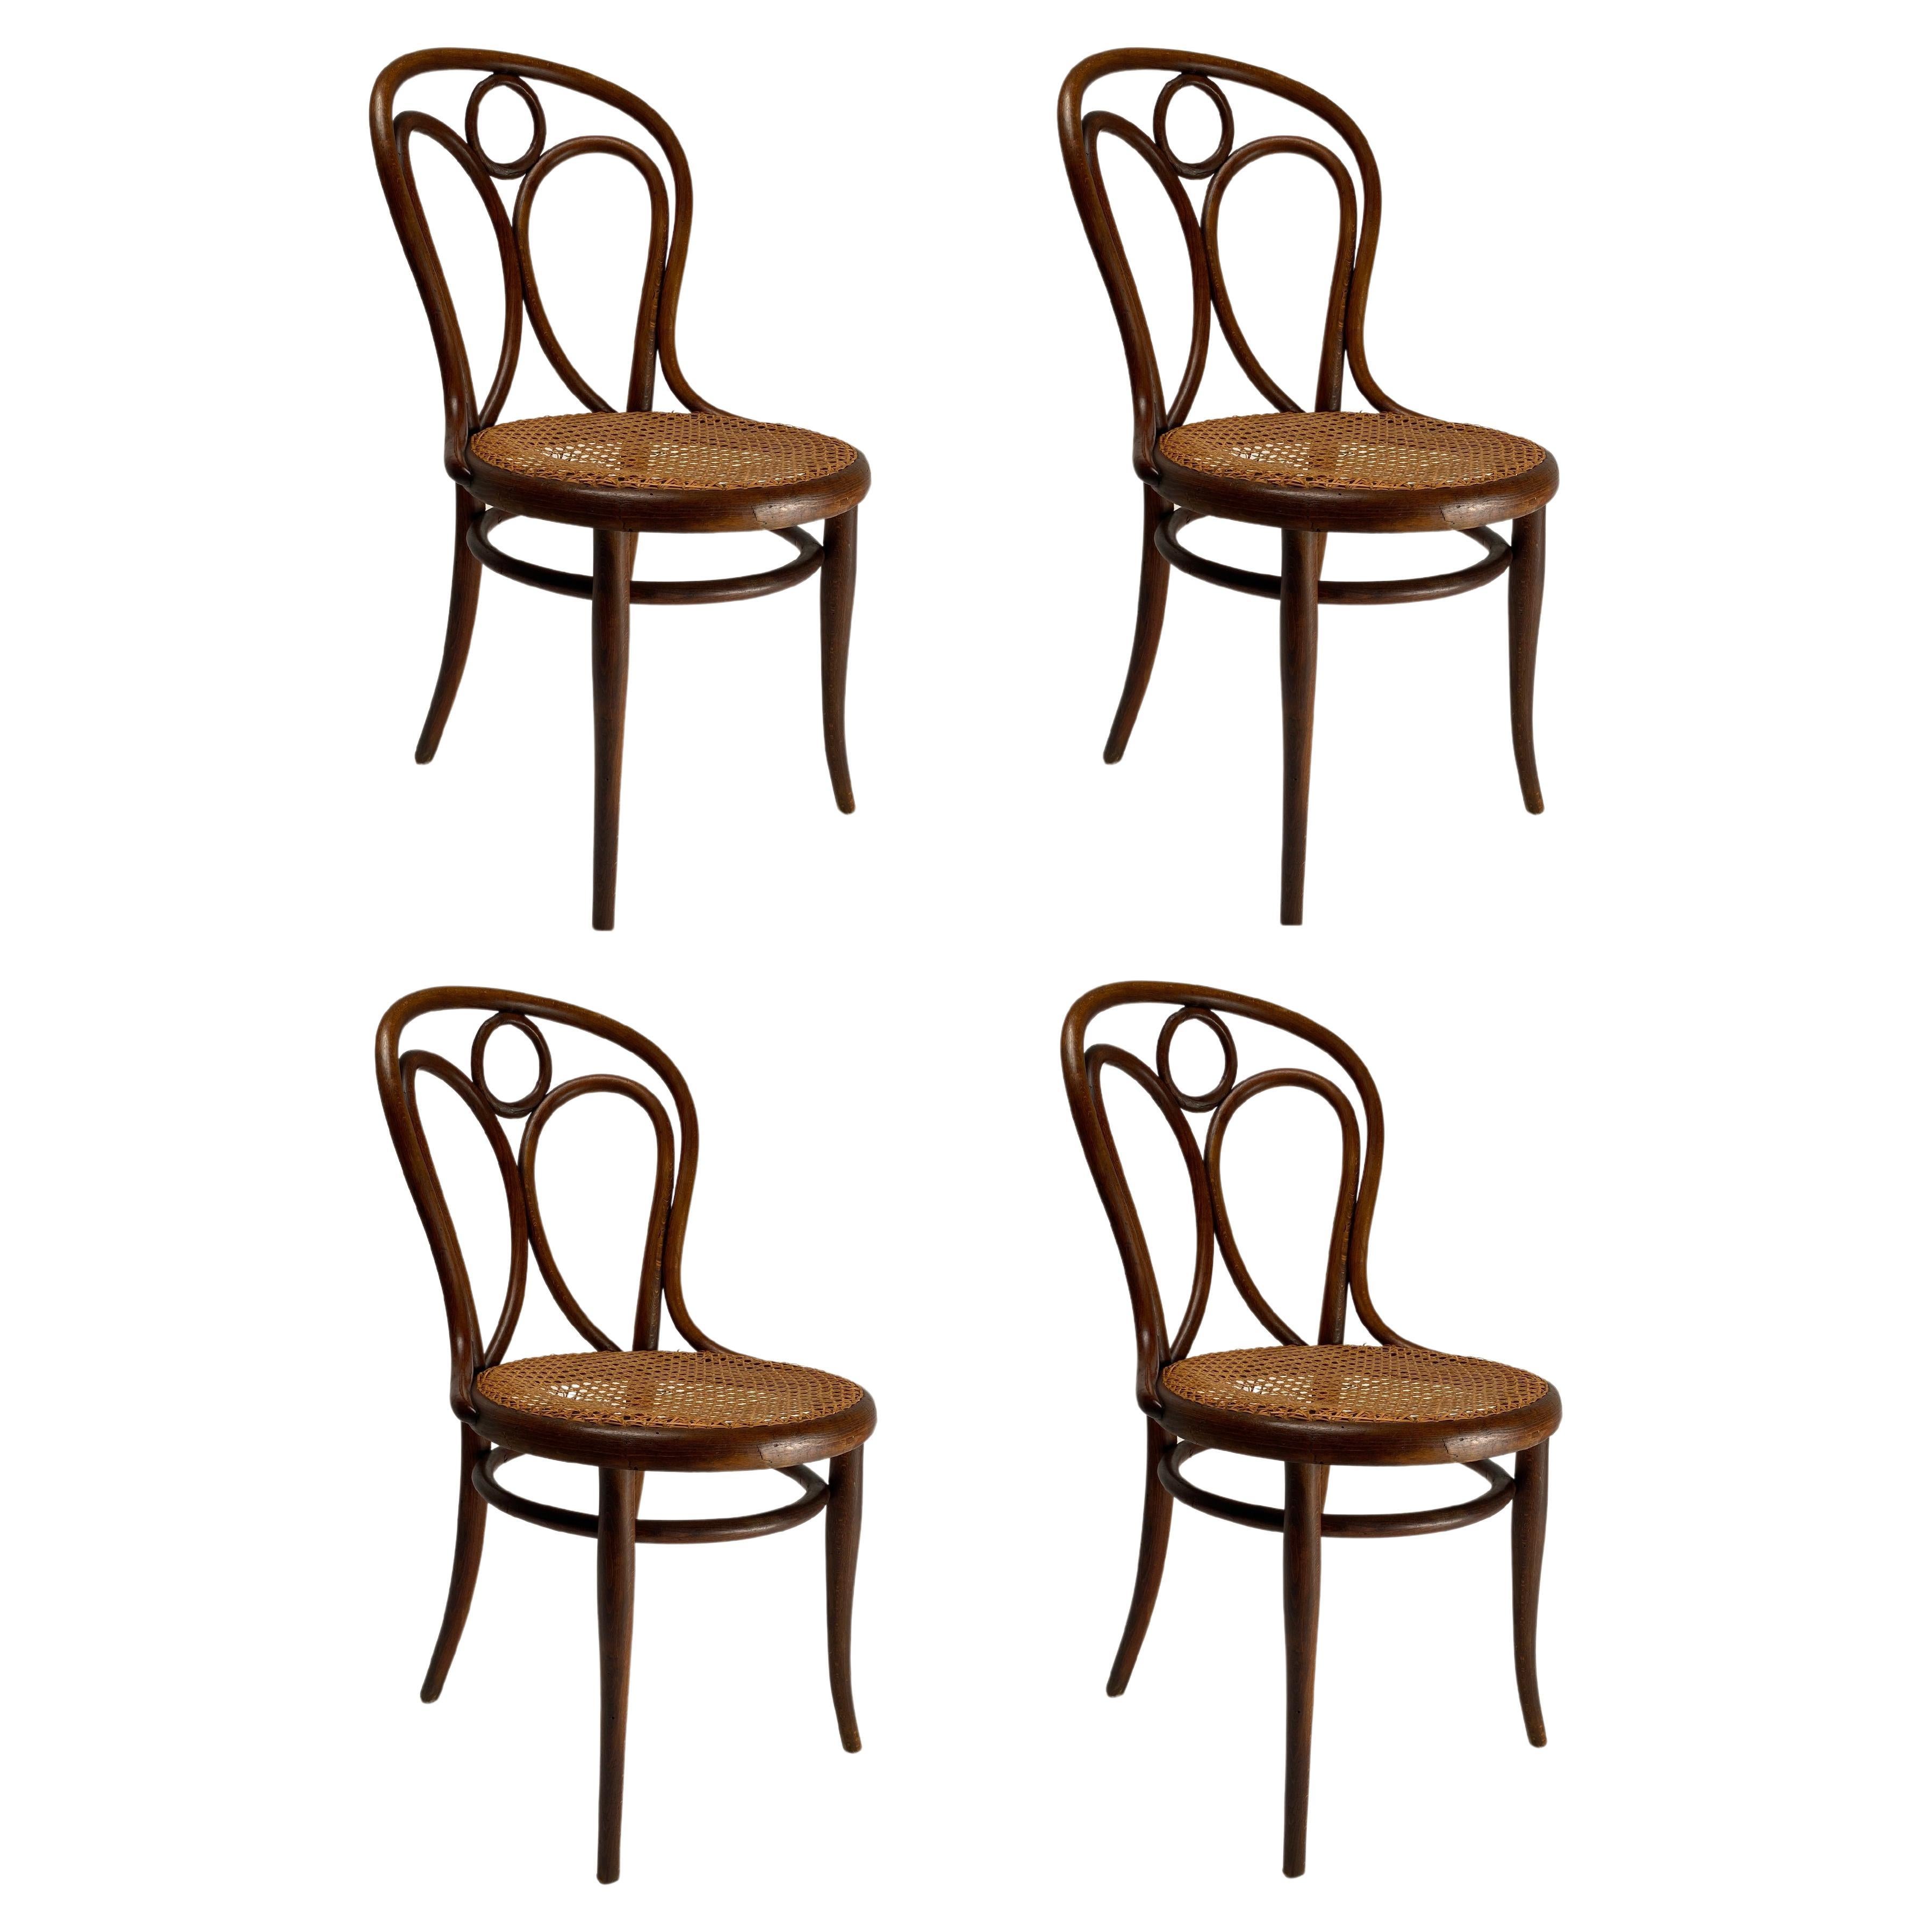 Set of 4 Thonet bent beech chairs, Austria, early 1900s For Sale